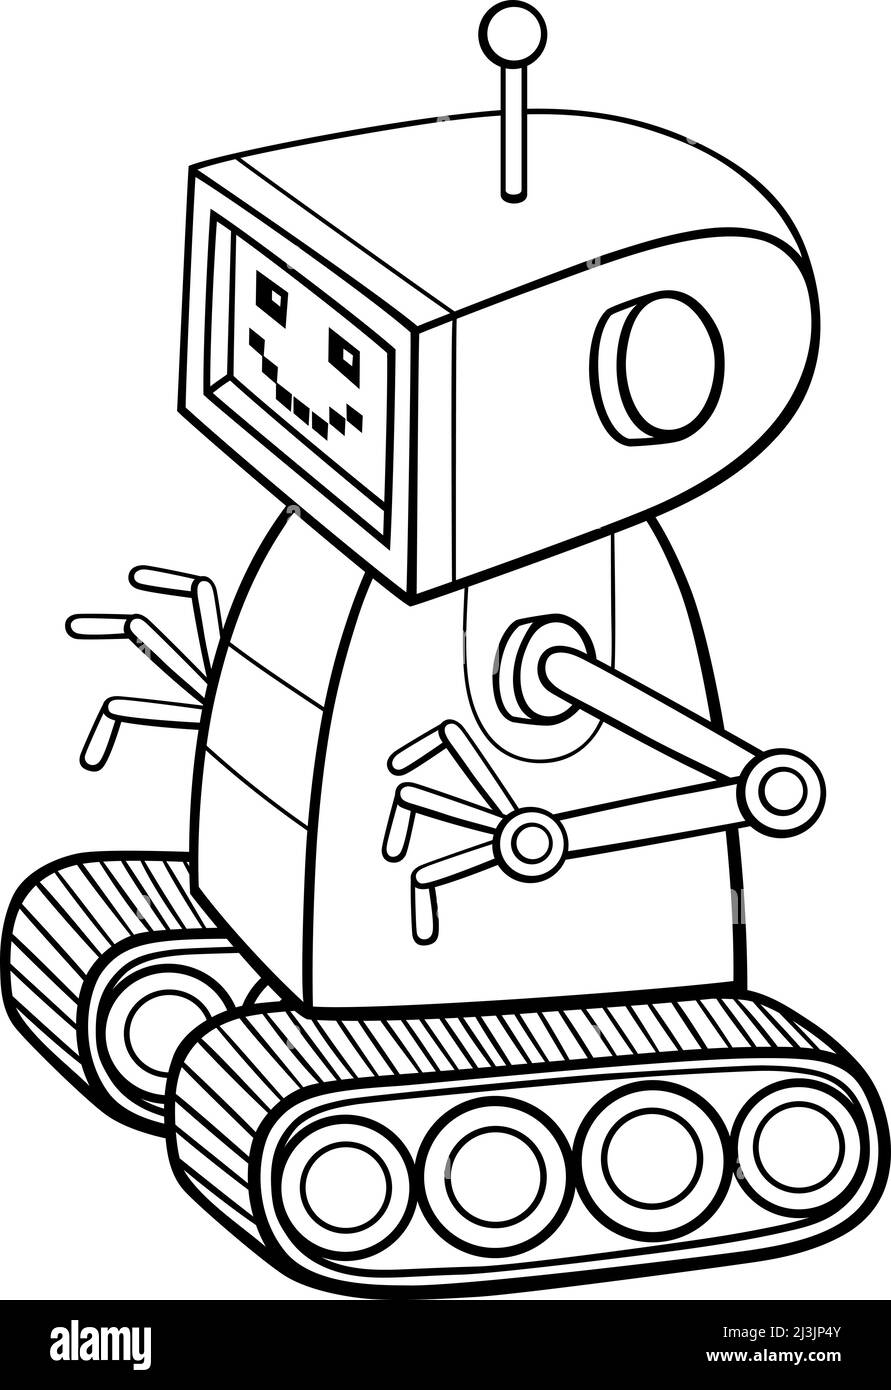 Black and white cartoon illustration of funny robot or droid fantasy character coloring book page Stock Vector